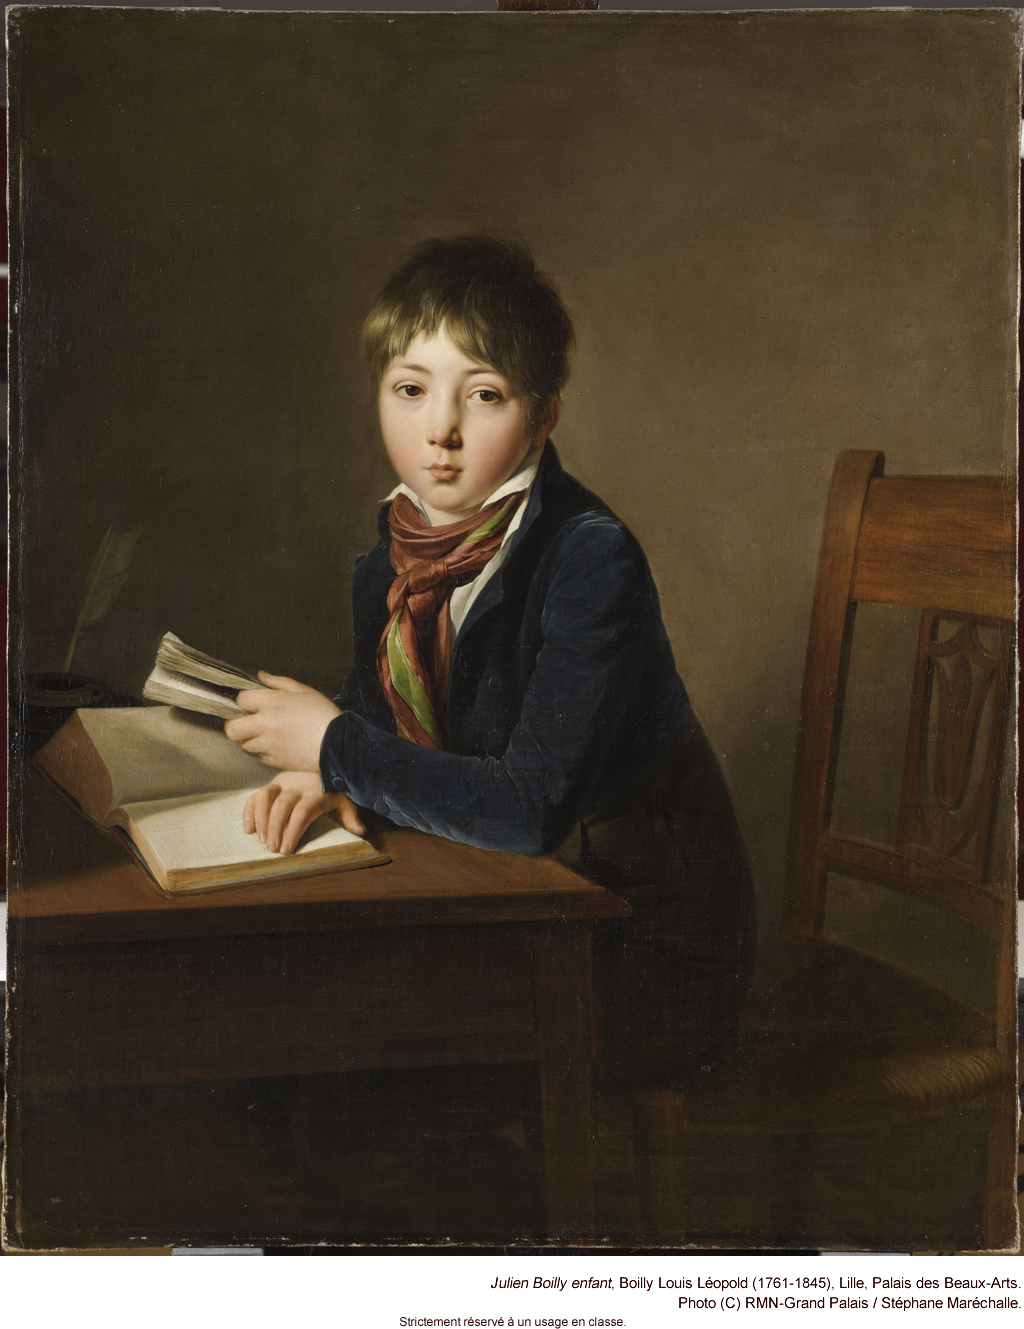 Julien Boilly, enfant. Louis Léopold Boilly (French,1761-1845). Oil on canvas. Lille, Palais des Beaux-Arts.
Boilly’s son Julien, here reading as a child, was later a painter himself. He noted that his father had worked in two distinct manners; the...